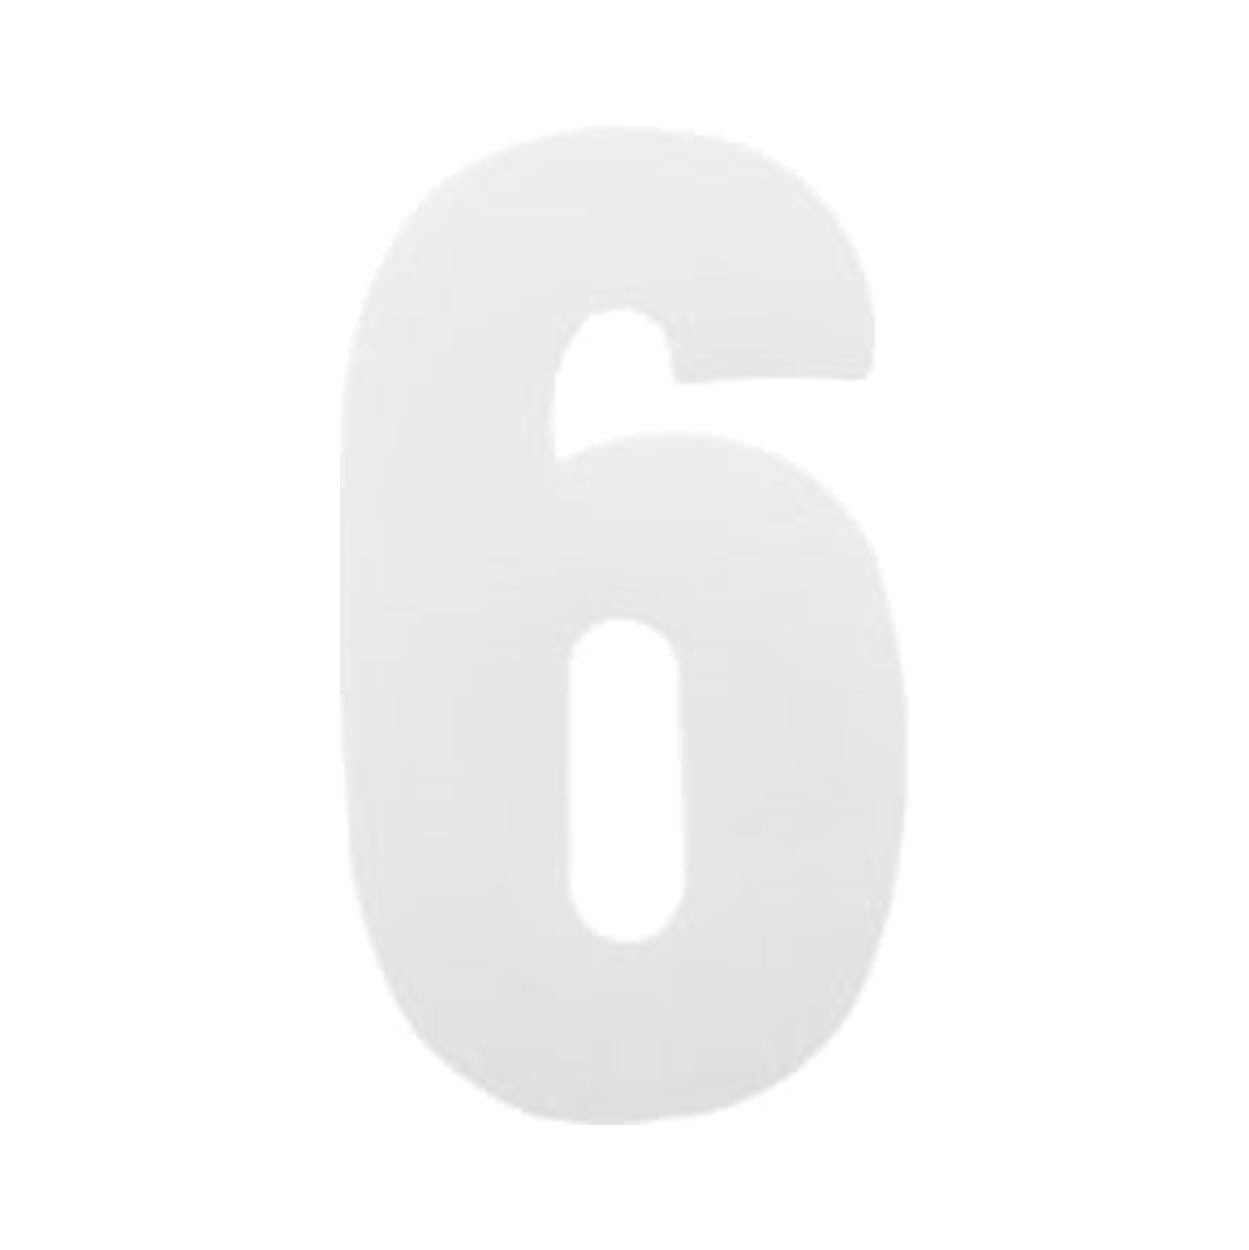 Best Hardware - Small White Vinyl Numeral No.6 Door Numerals | Snape & Sons